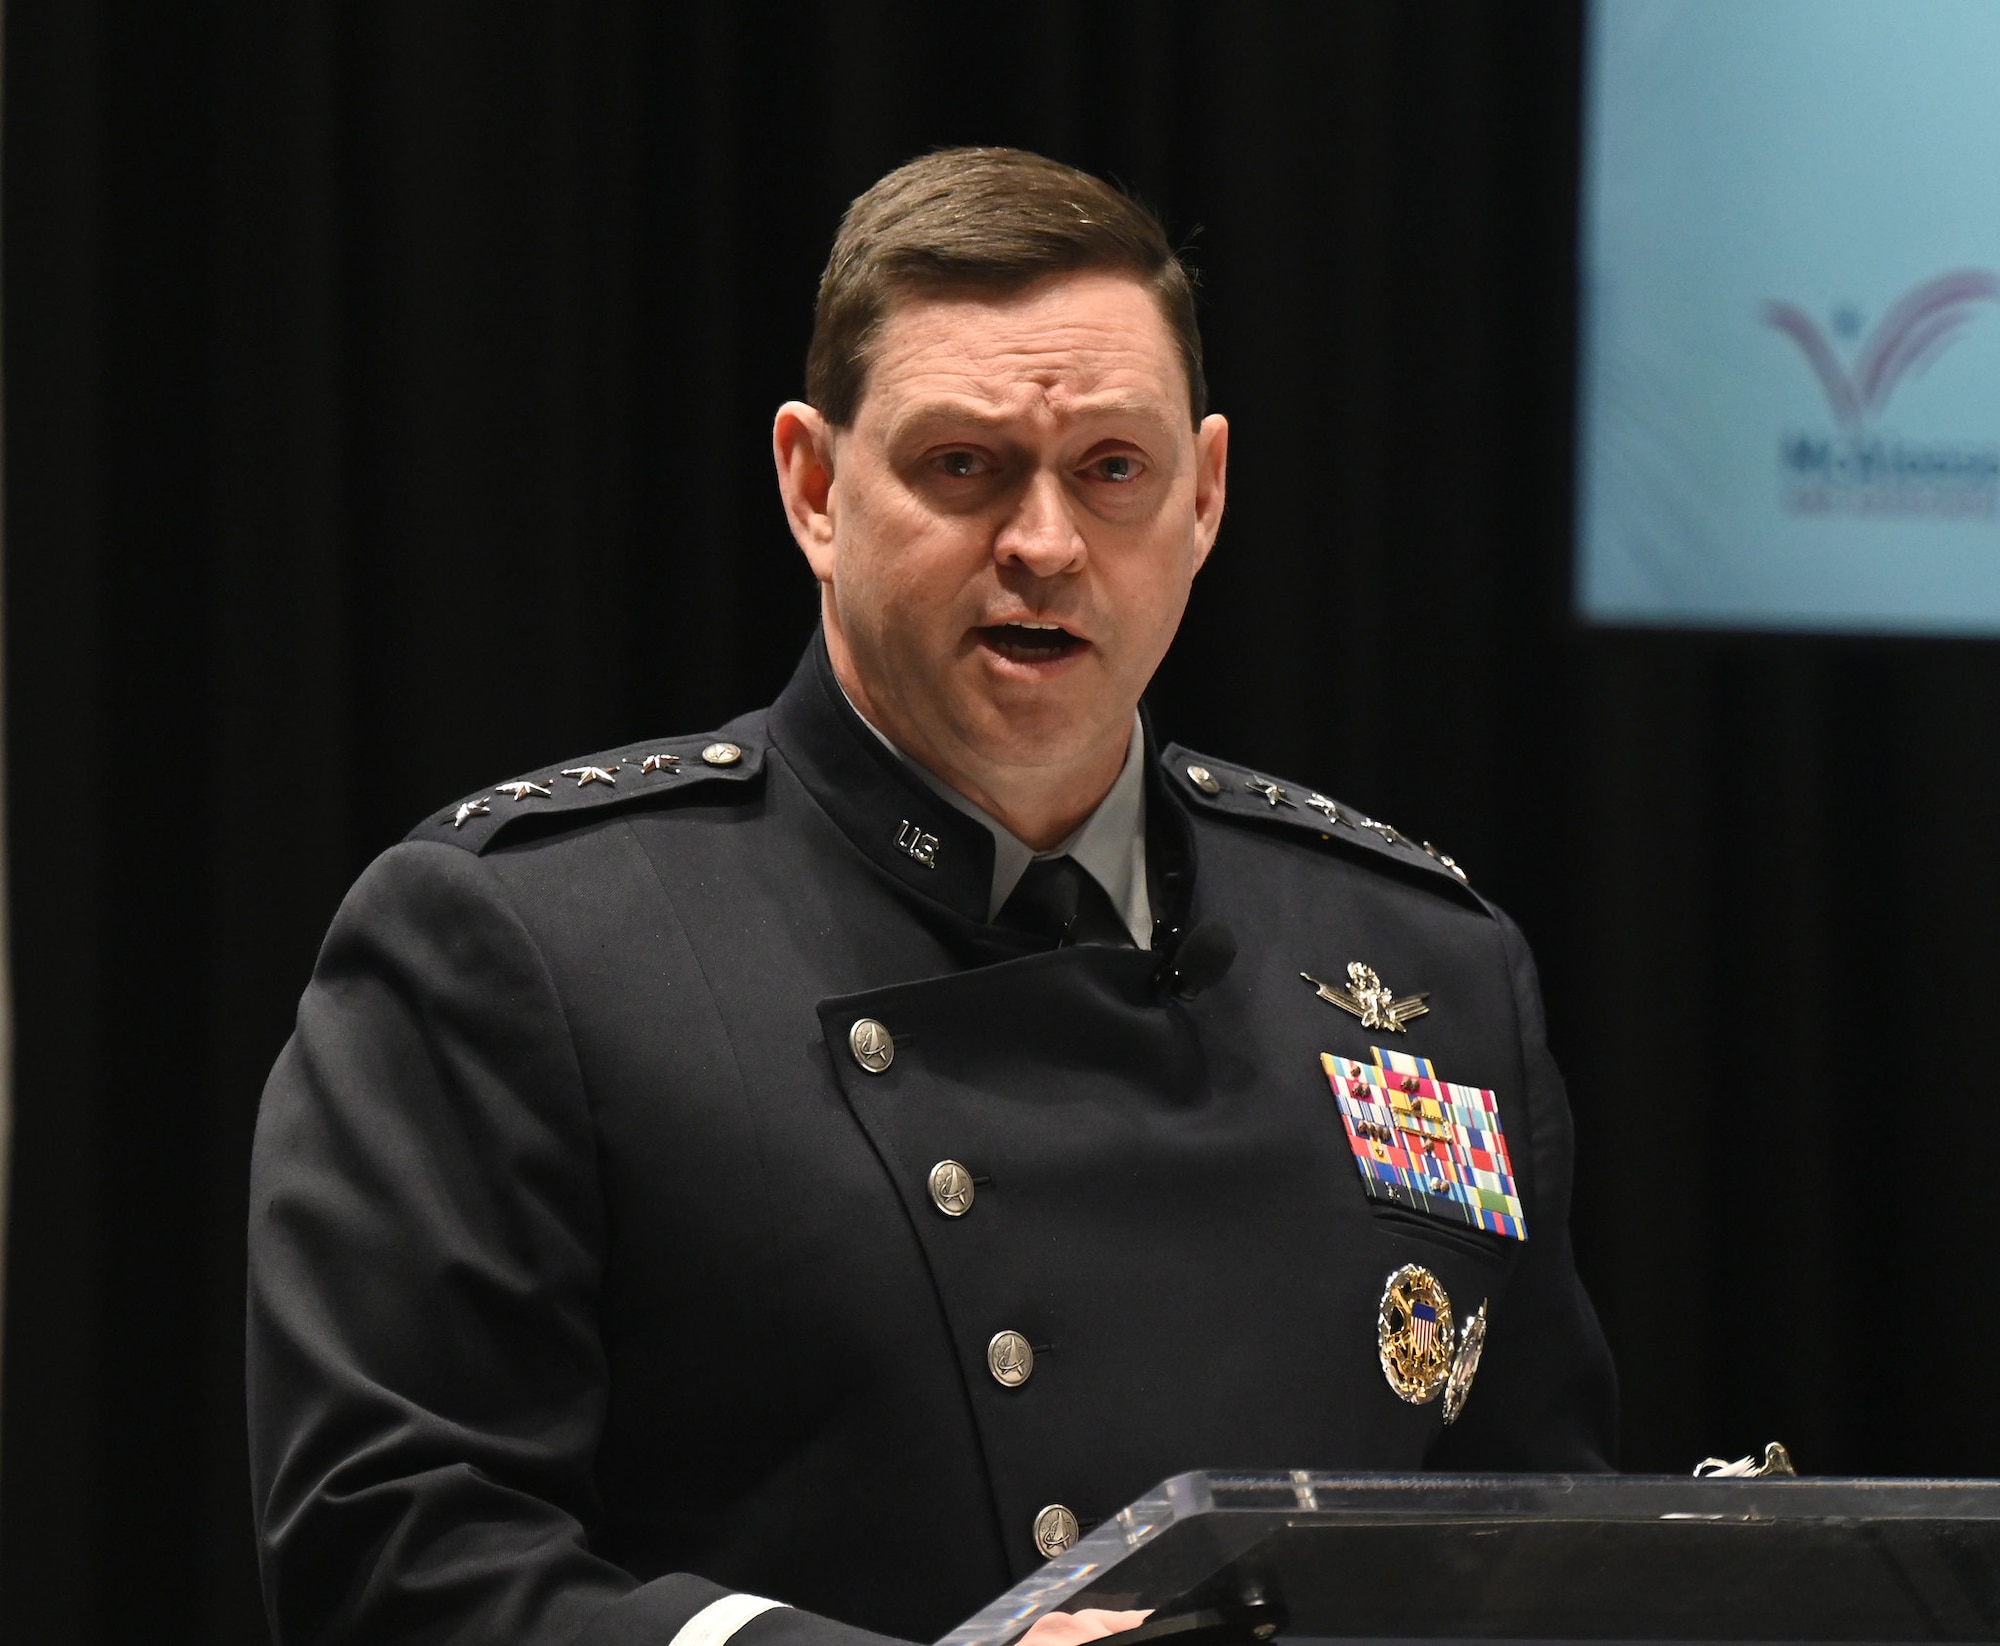 Chief of Space Operations Gen. Chance Saltzman speaks during the McAleese Defense Program Conference at the Ronald Reagan Building and International Trade Center, Washington, D.C. March 15, 2023. (U.S. Air Force photo by Andy Morataya)